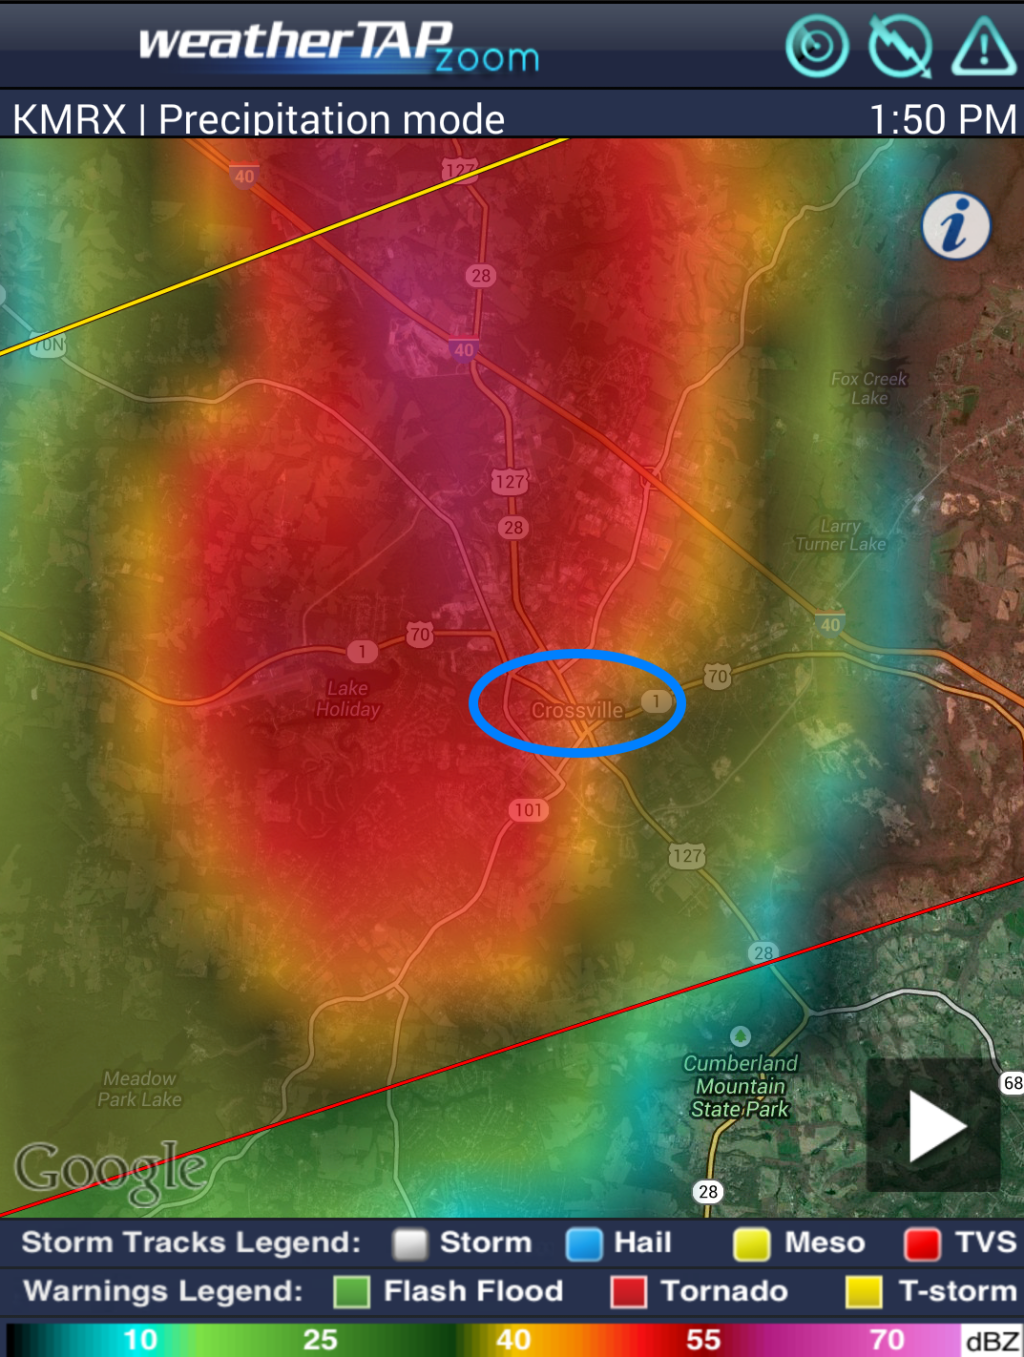 Storm Radar Image - Crossville is circled in blue.